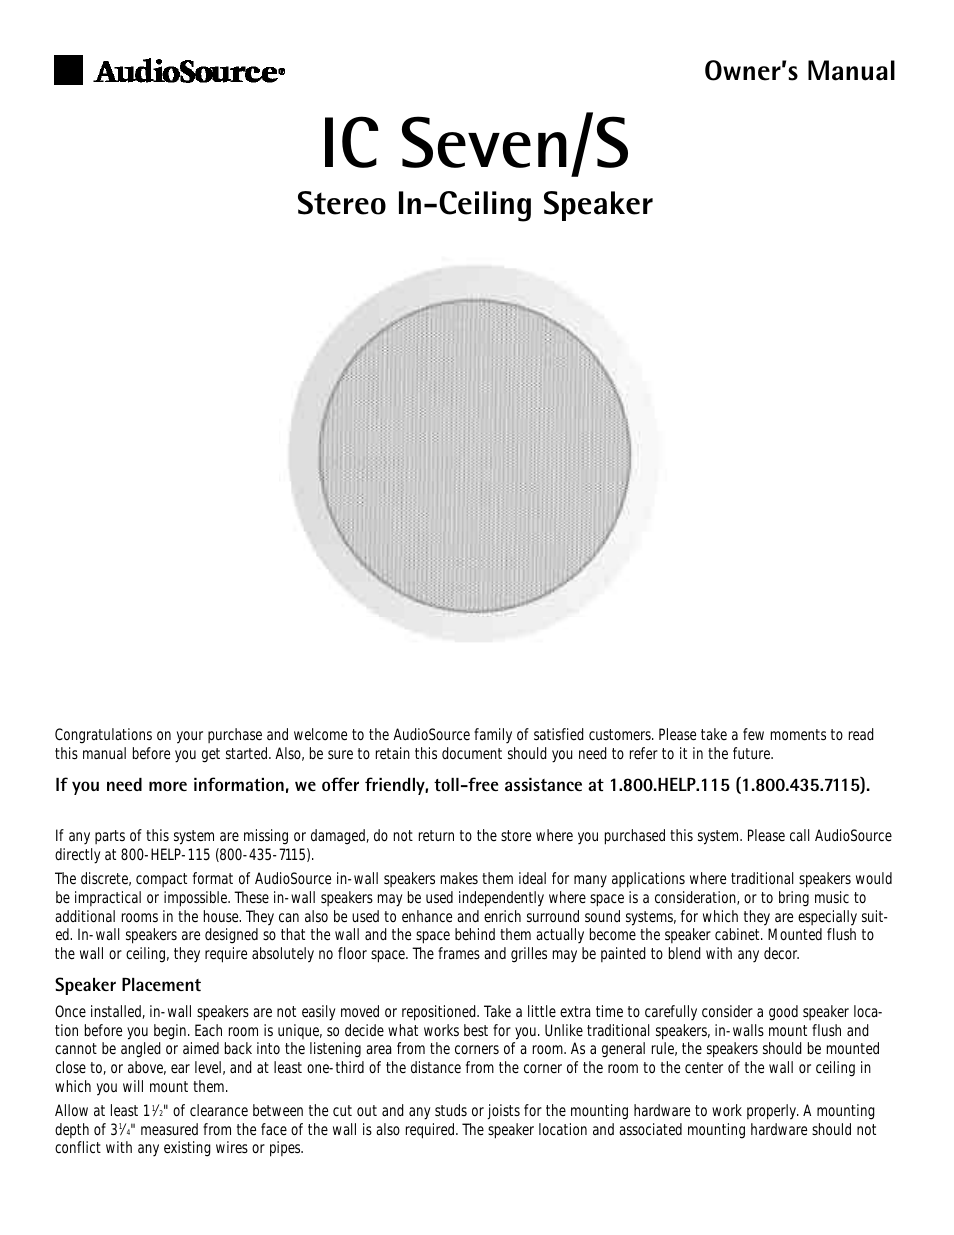 IC Seven/S